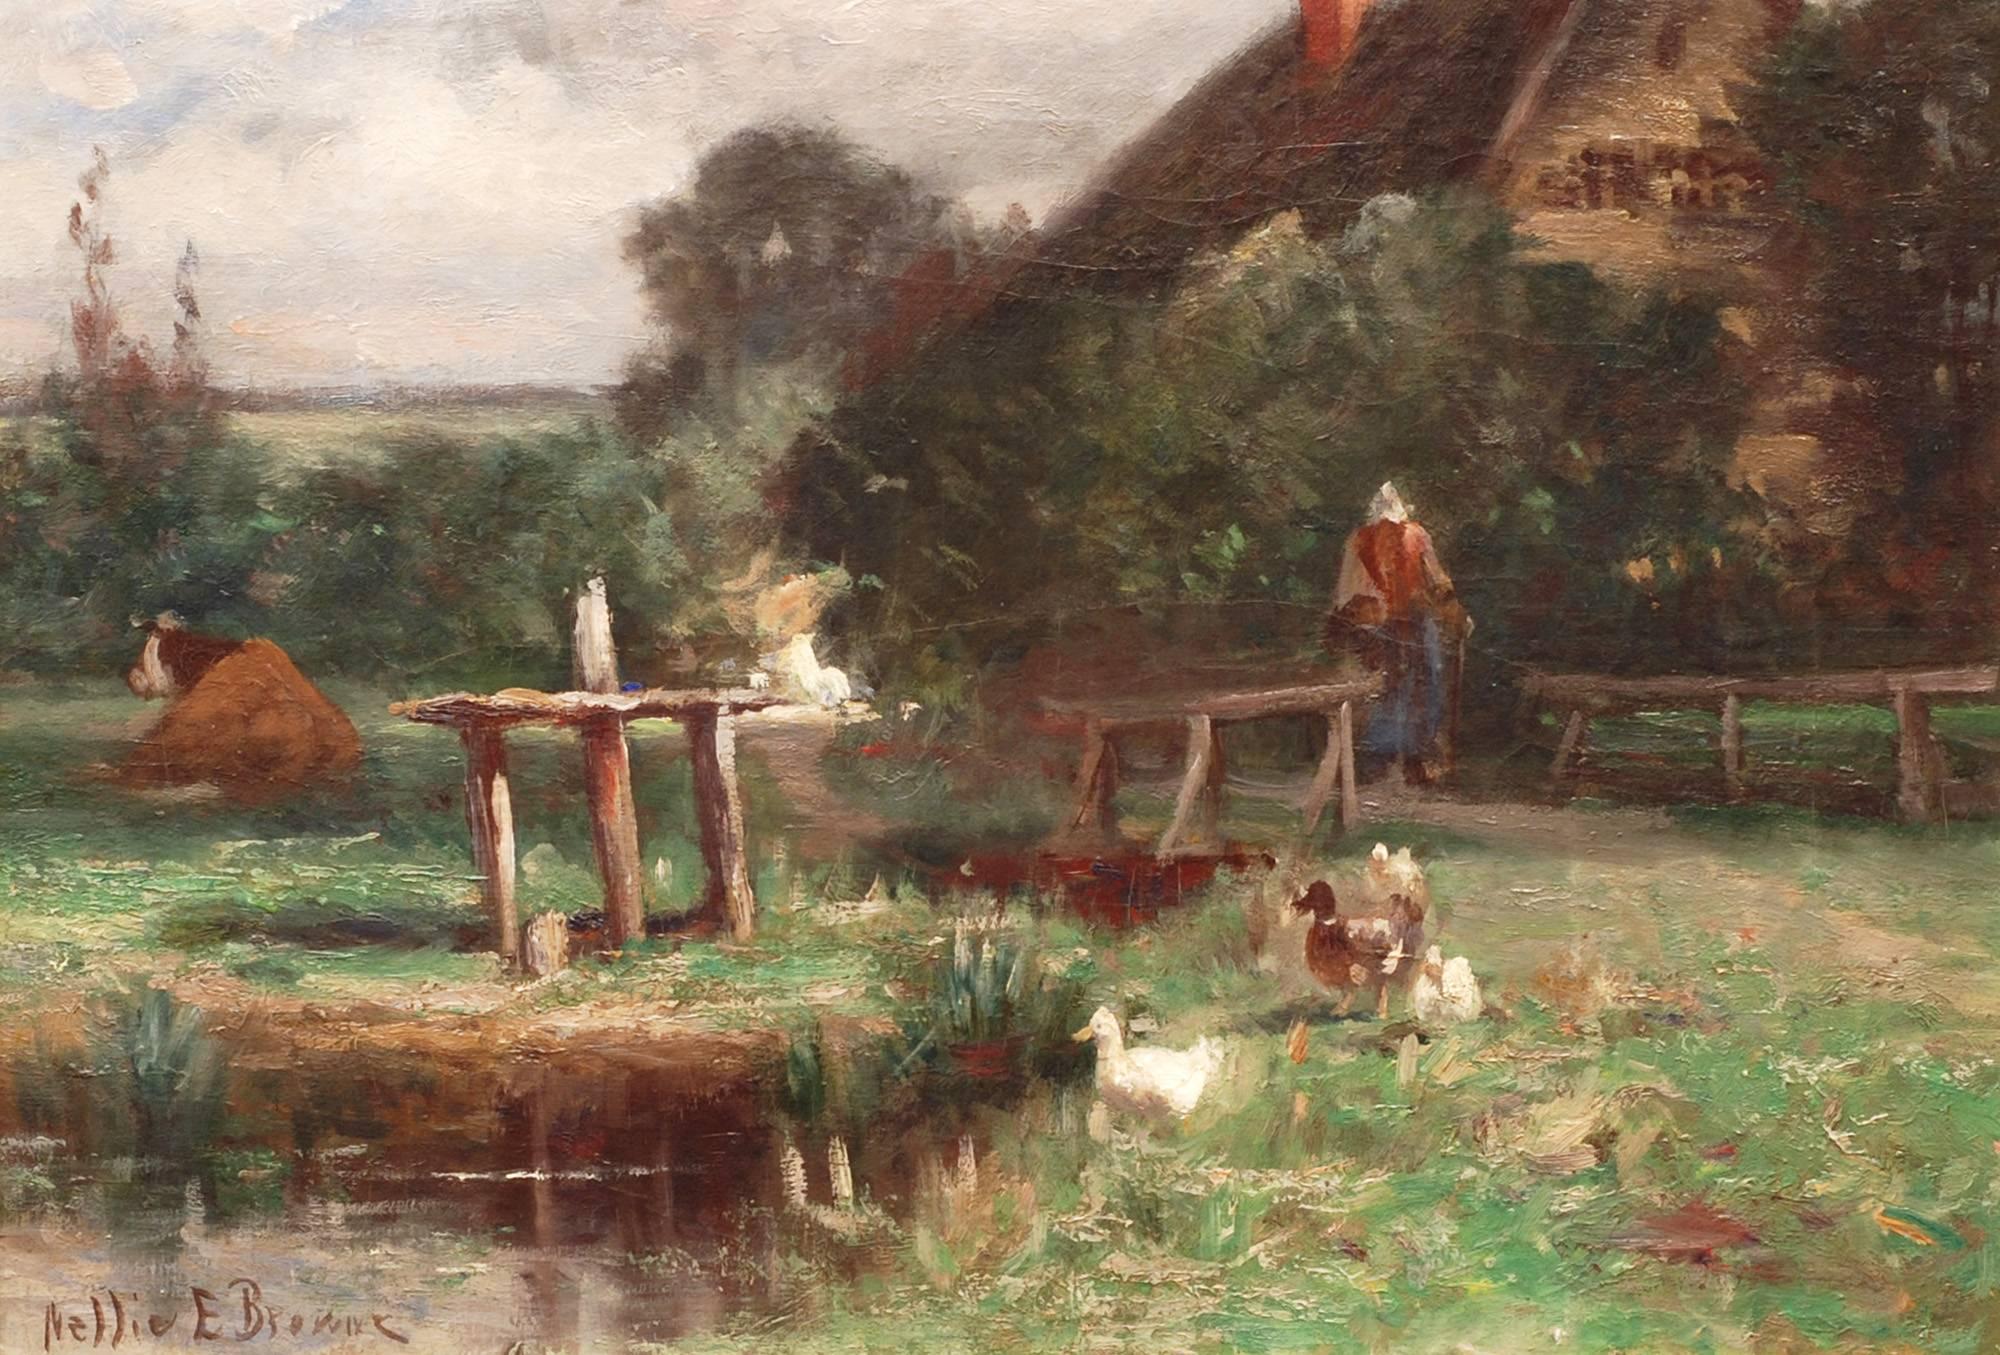 Nellie E. Brown (fl. 1890-1910) Landscape Painting - In the Farmyard